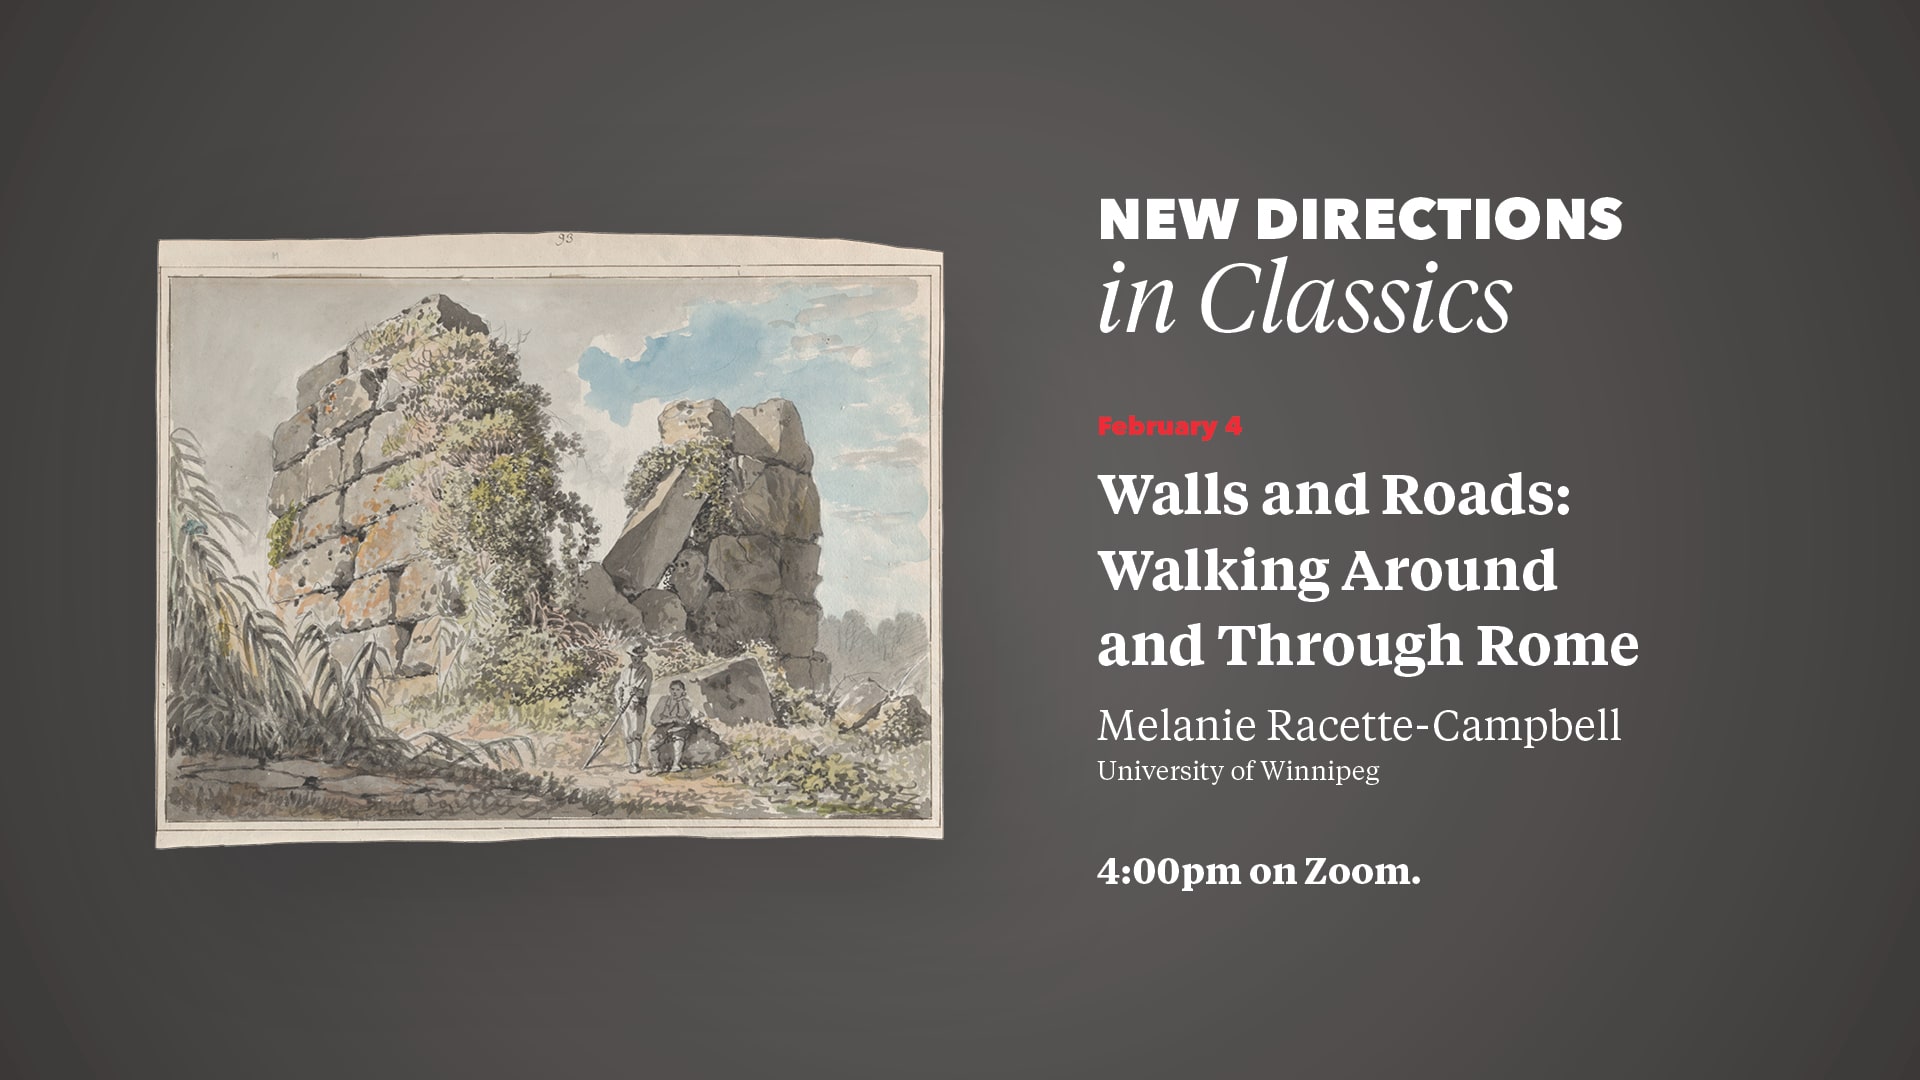 Promo image for New Directions in Classics on February 4, full text on web page